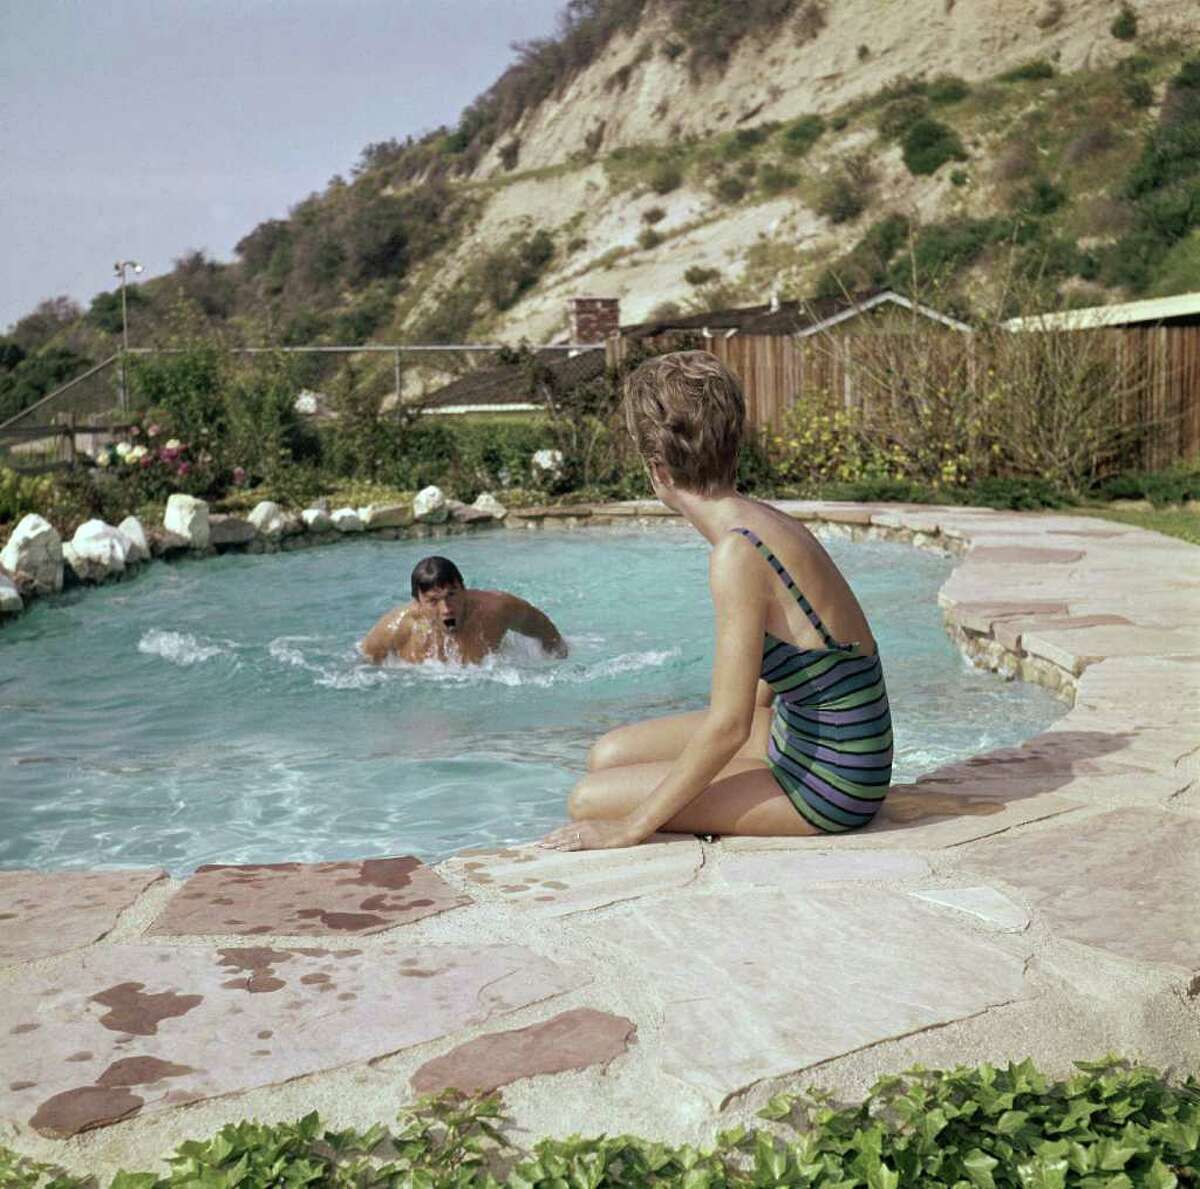 While wife Margaret sits on the edge of the pool between swims, actor Clint Eastwood thrashes about, enjoying the refreshing dip. In back is their home, Oct. 25, 1962 in Hollywood Hills, Calif.